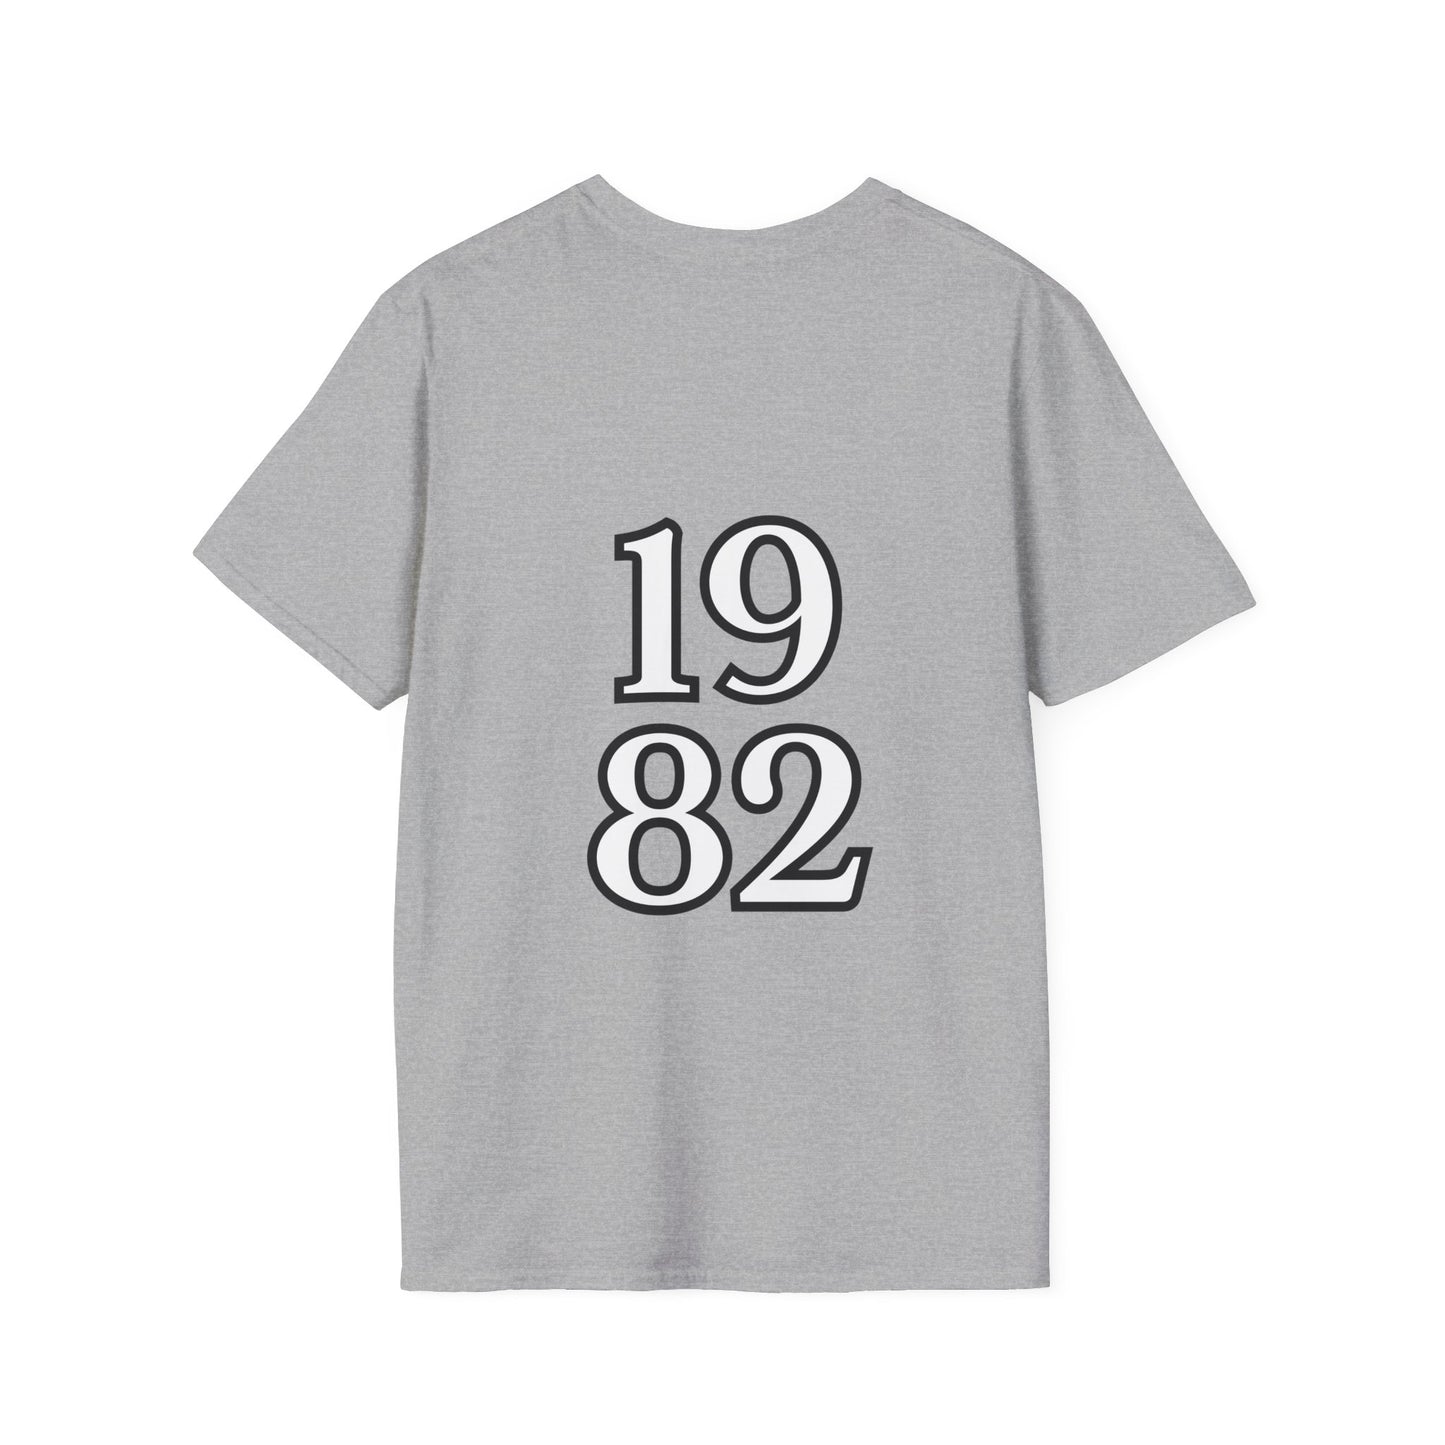 Copy of 1982 x Years Collection - tee